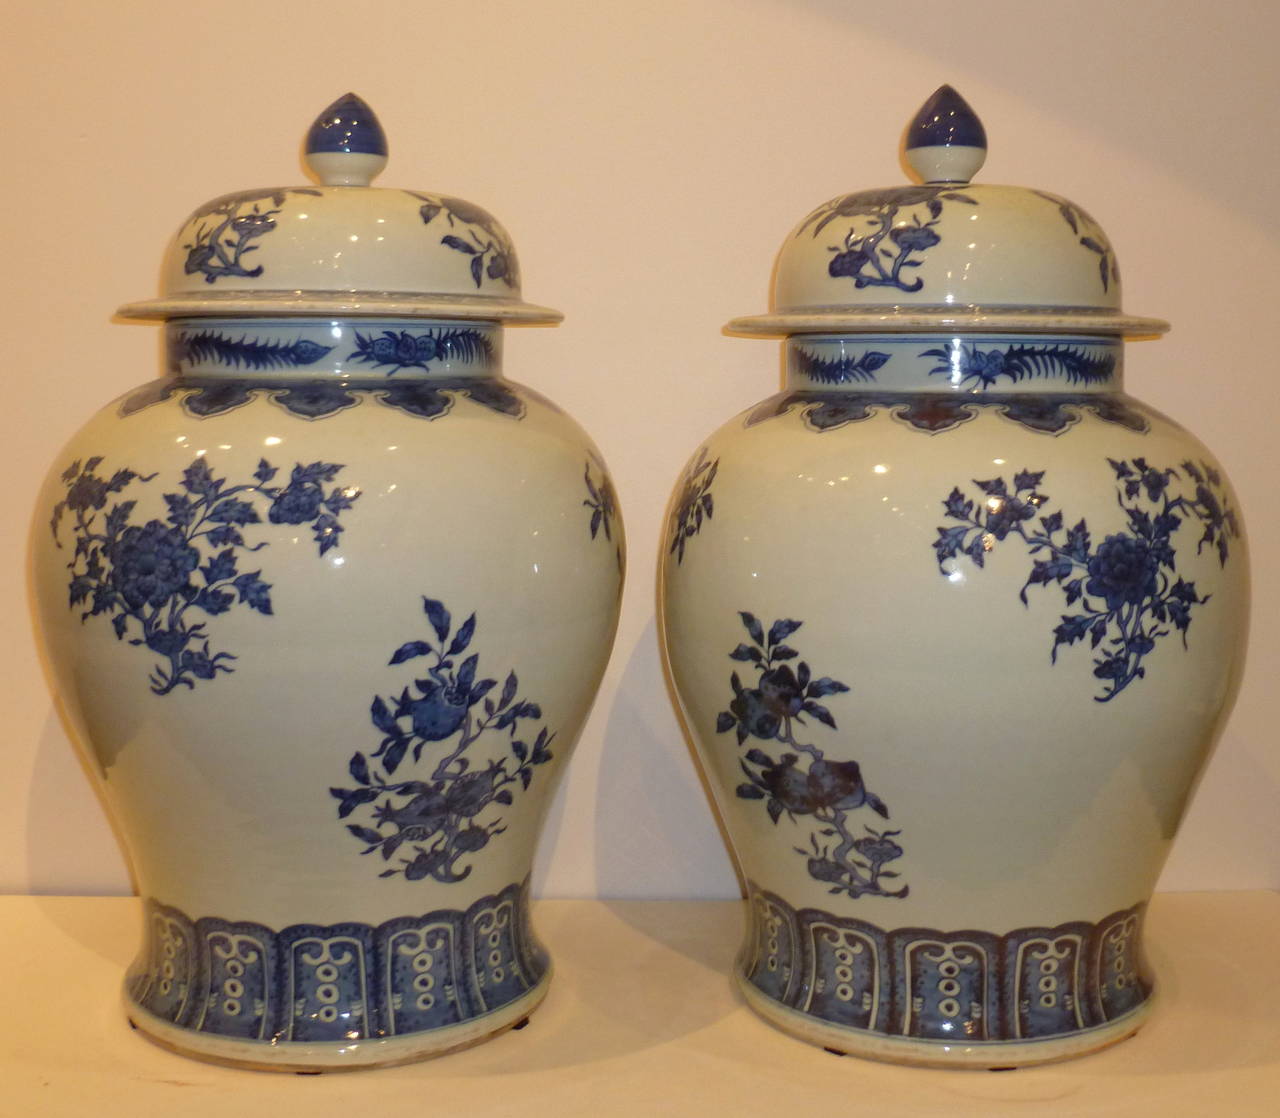 A pair of refined and elegant porcelain jars with covers,  hand-painted blue and white floral motif. Beautiful color, form and lines. 12